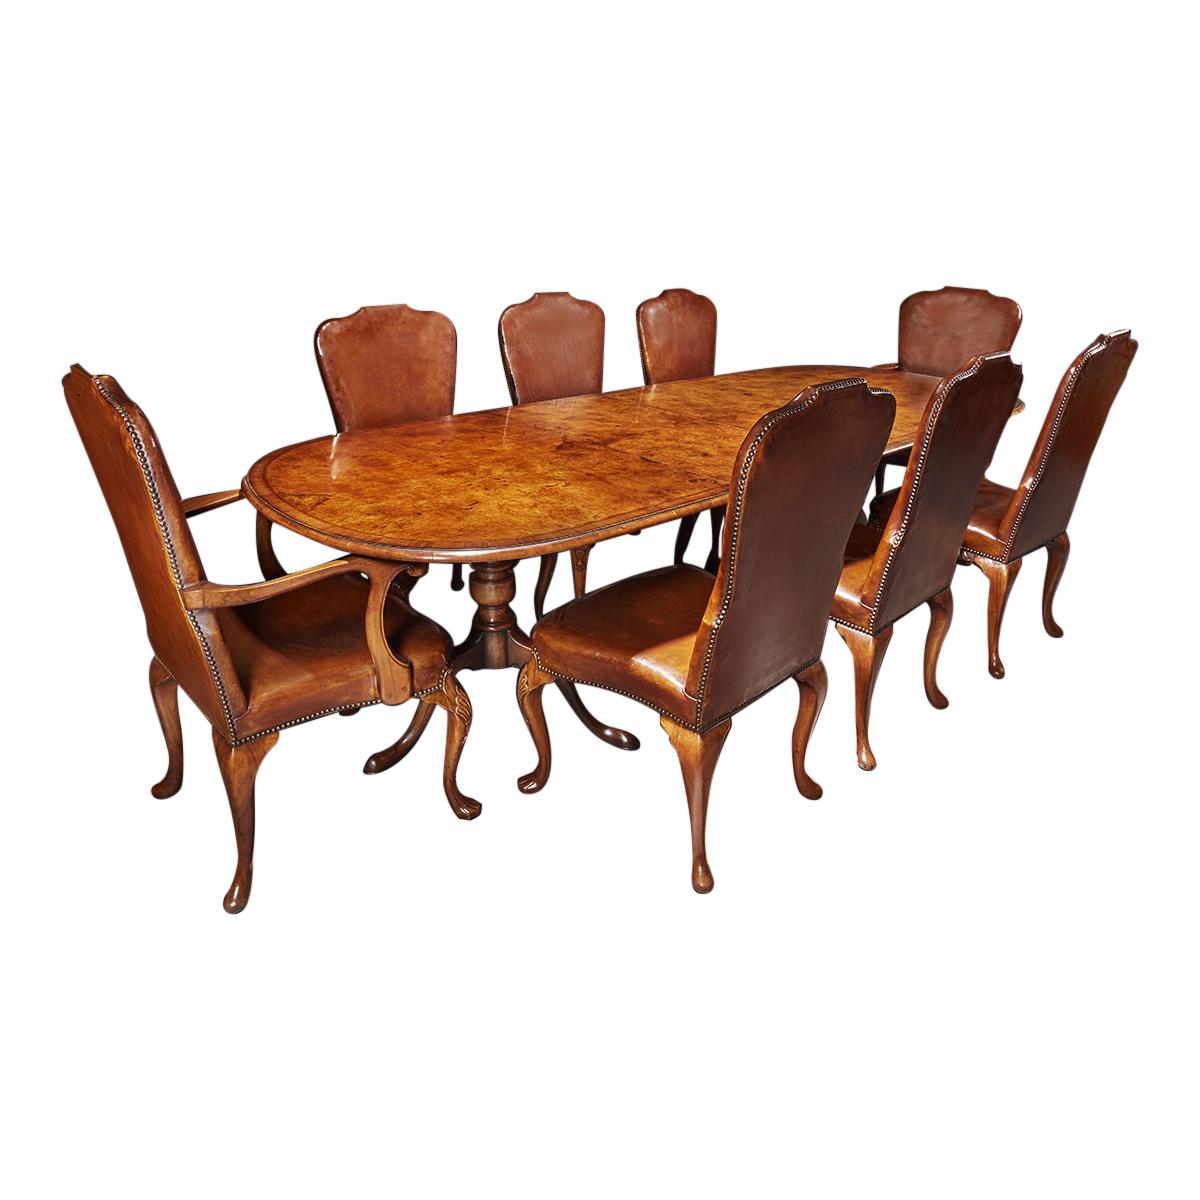 Antique Early 20th Century Walnut Dining Table Set with 8 Leather Chairs